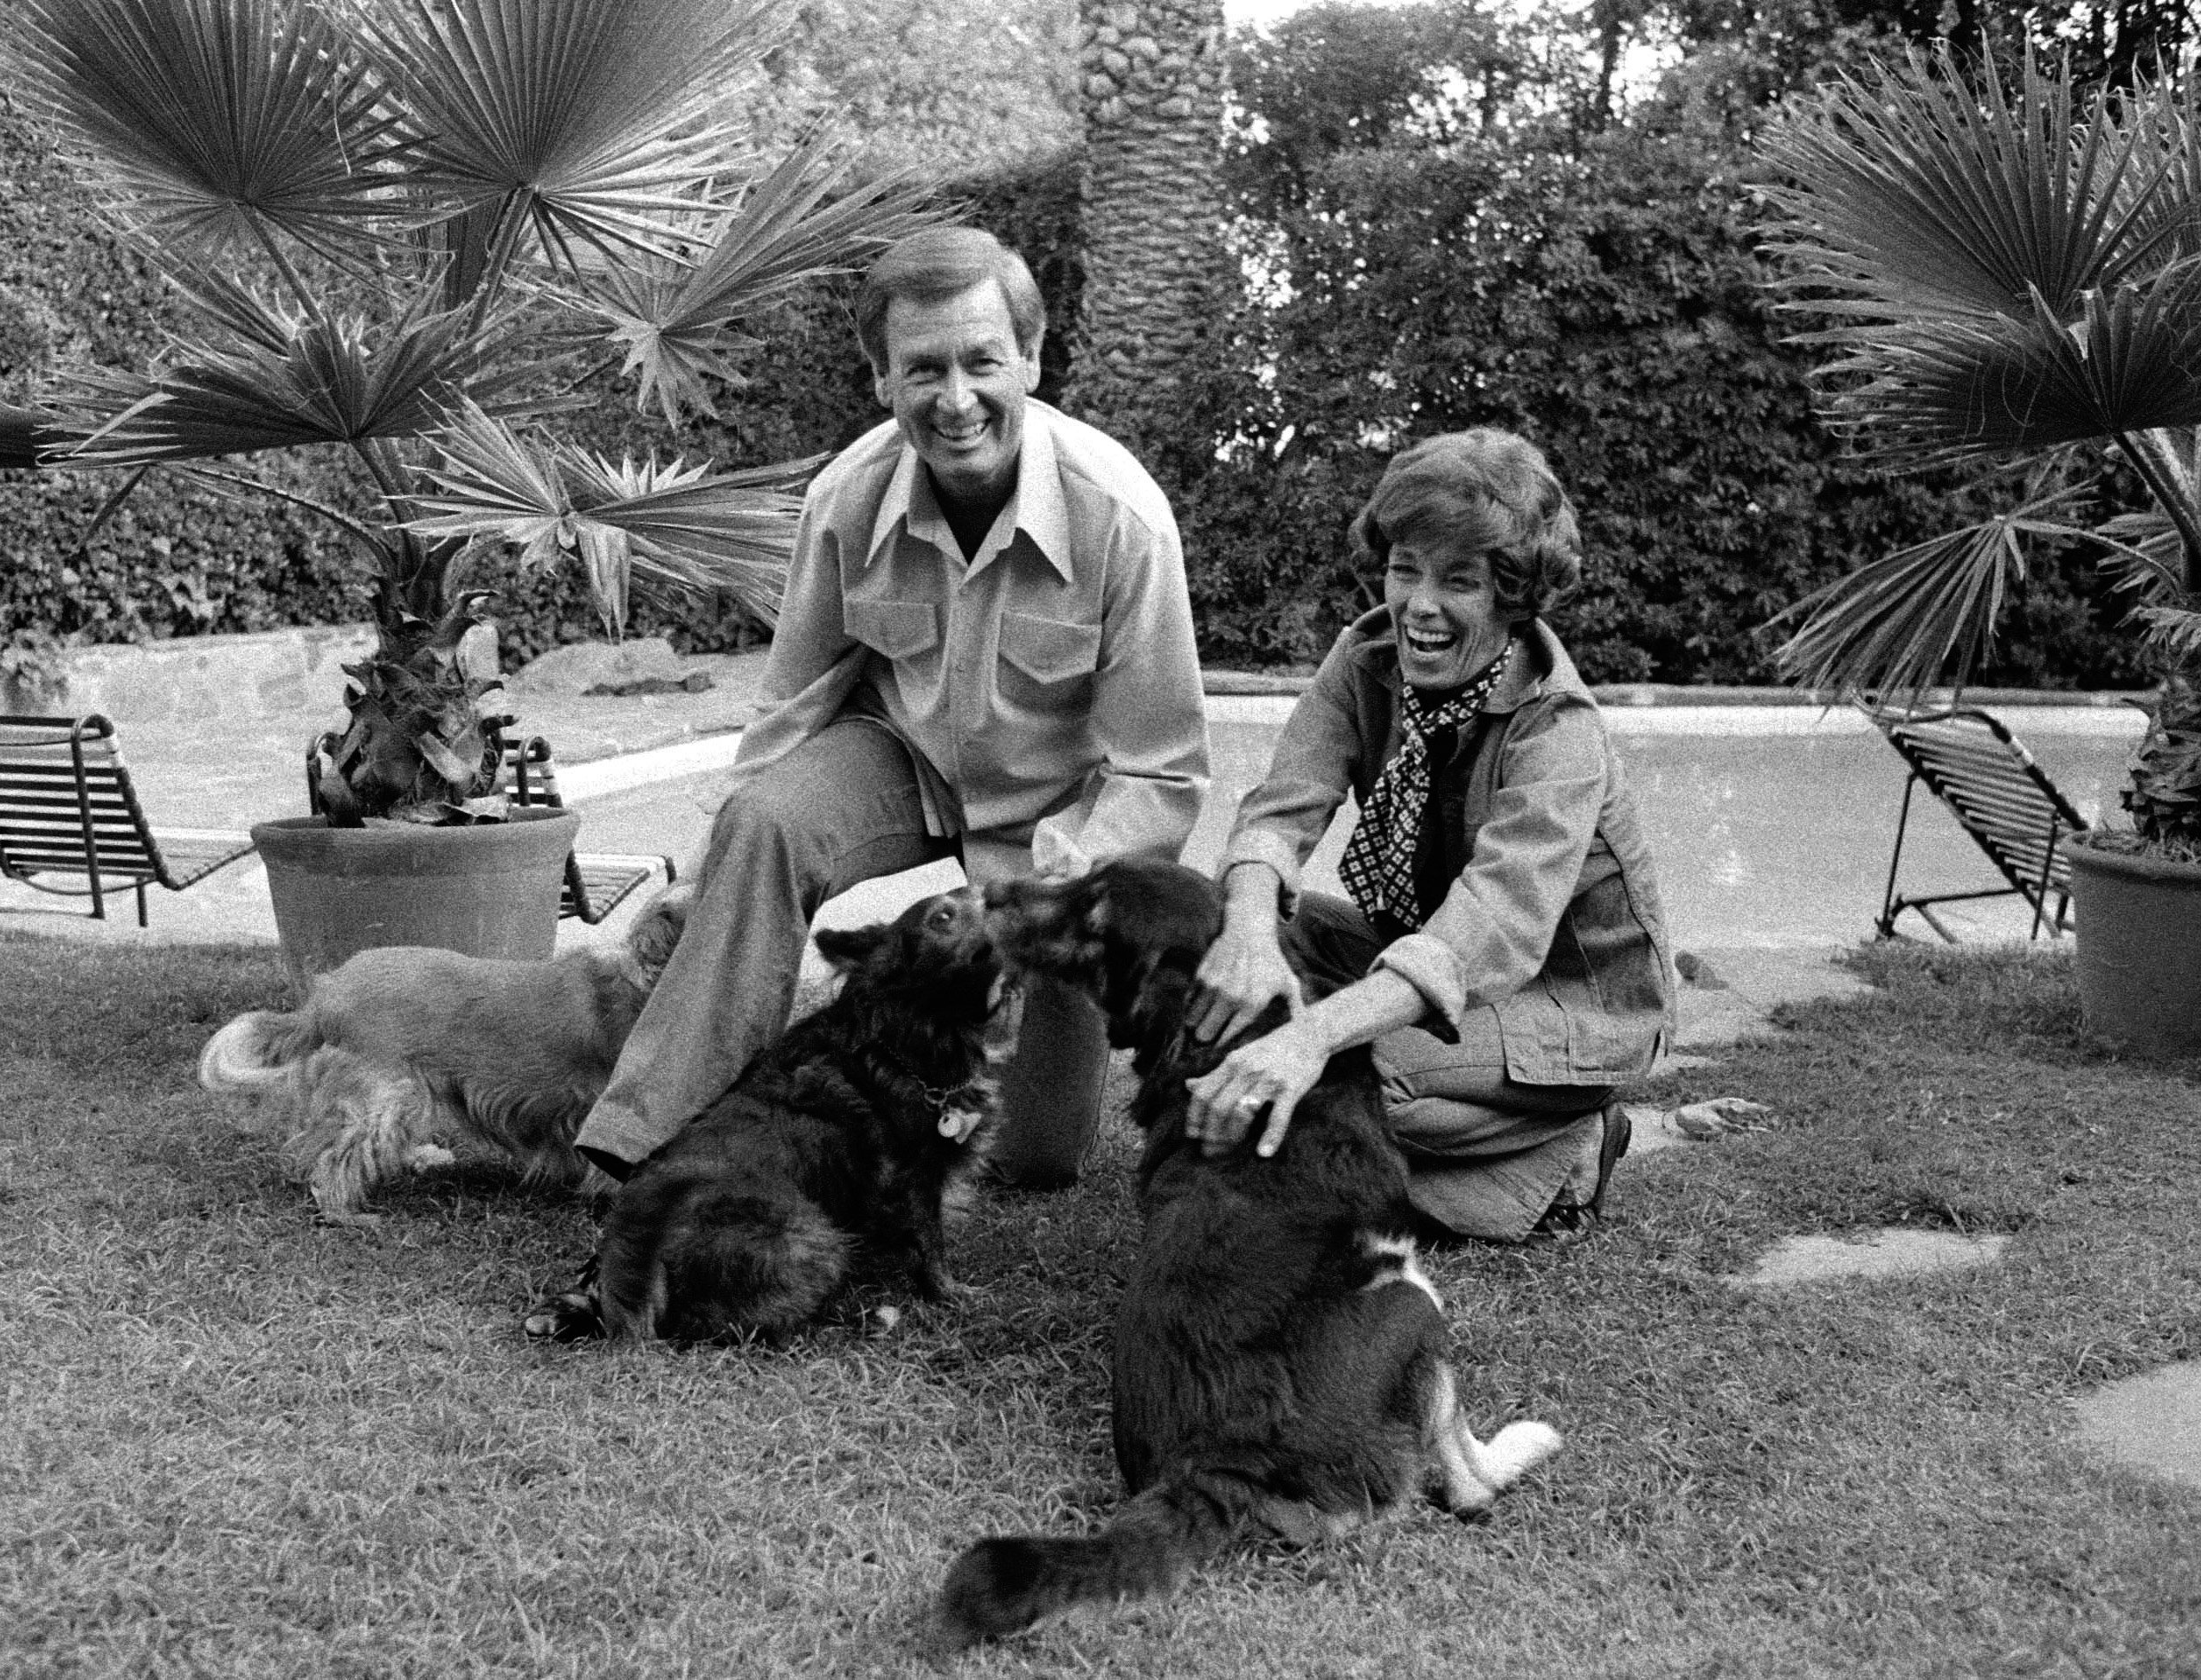 American game show host Bob Barker and his wife Dorothy Jo (1924 - 1981) play with three dogs in their back yard, November 4, 1977. | Source: Getty Images